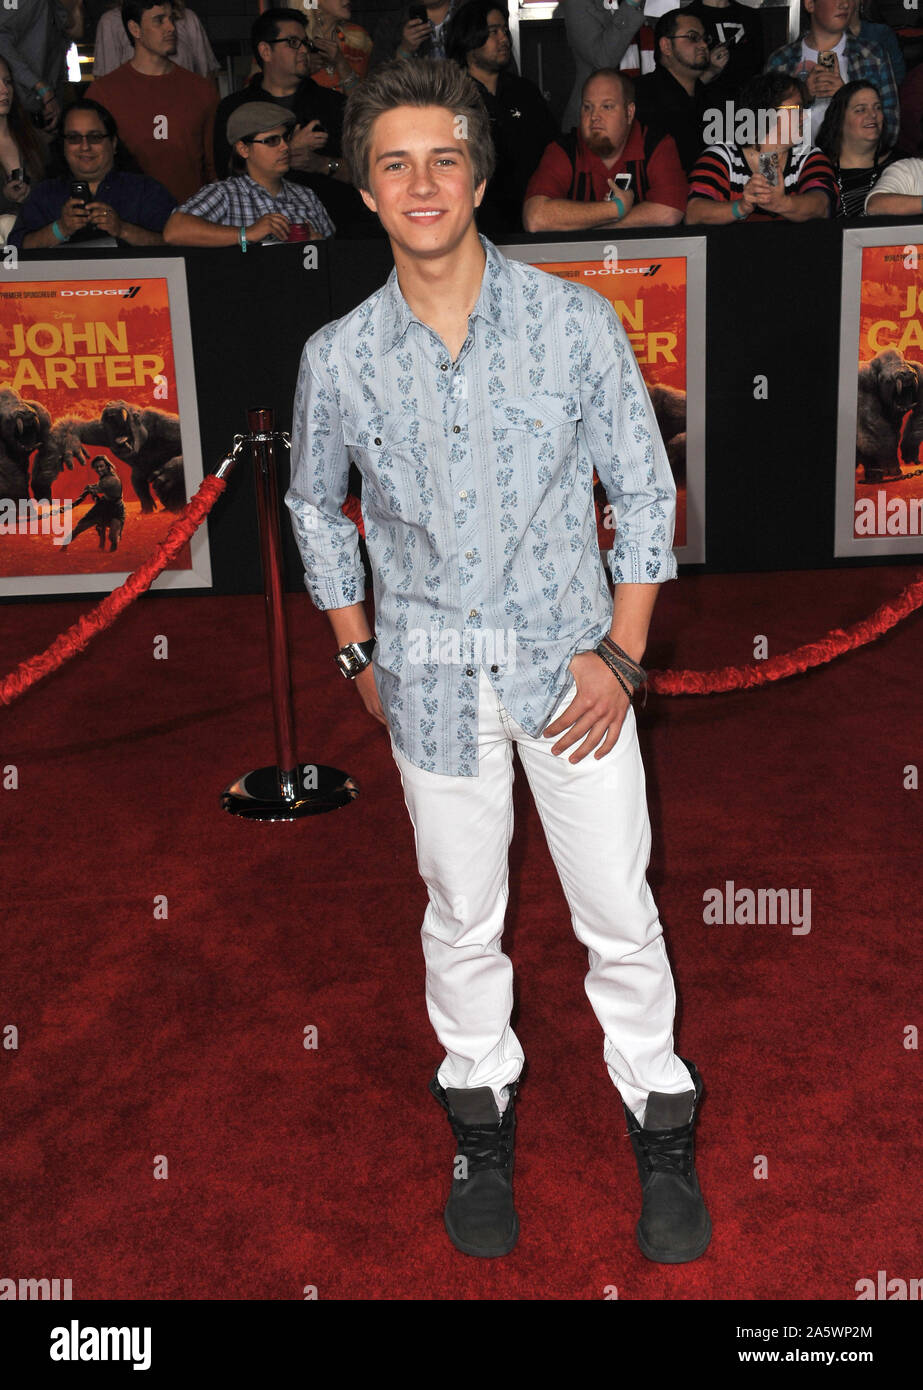 LOS ANGELES, CA. February 22, 2012: Billy Unger at the world premiere of 'John Carter' at the Regal Cinemas L.A. Live. © 2012 Paul Smith / Featureflash Stock Photo